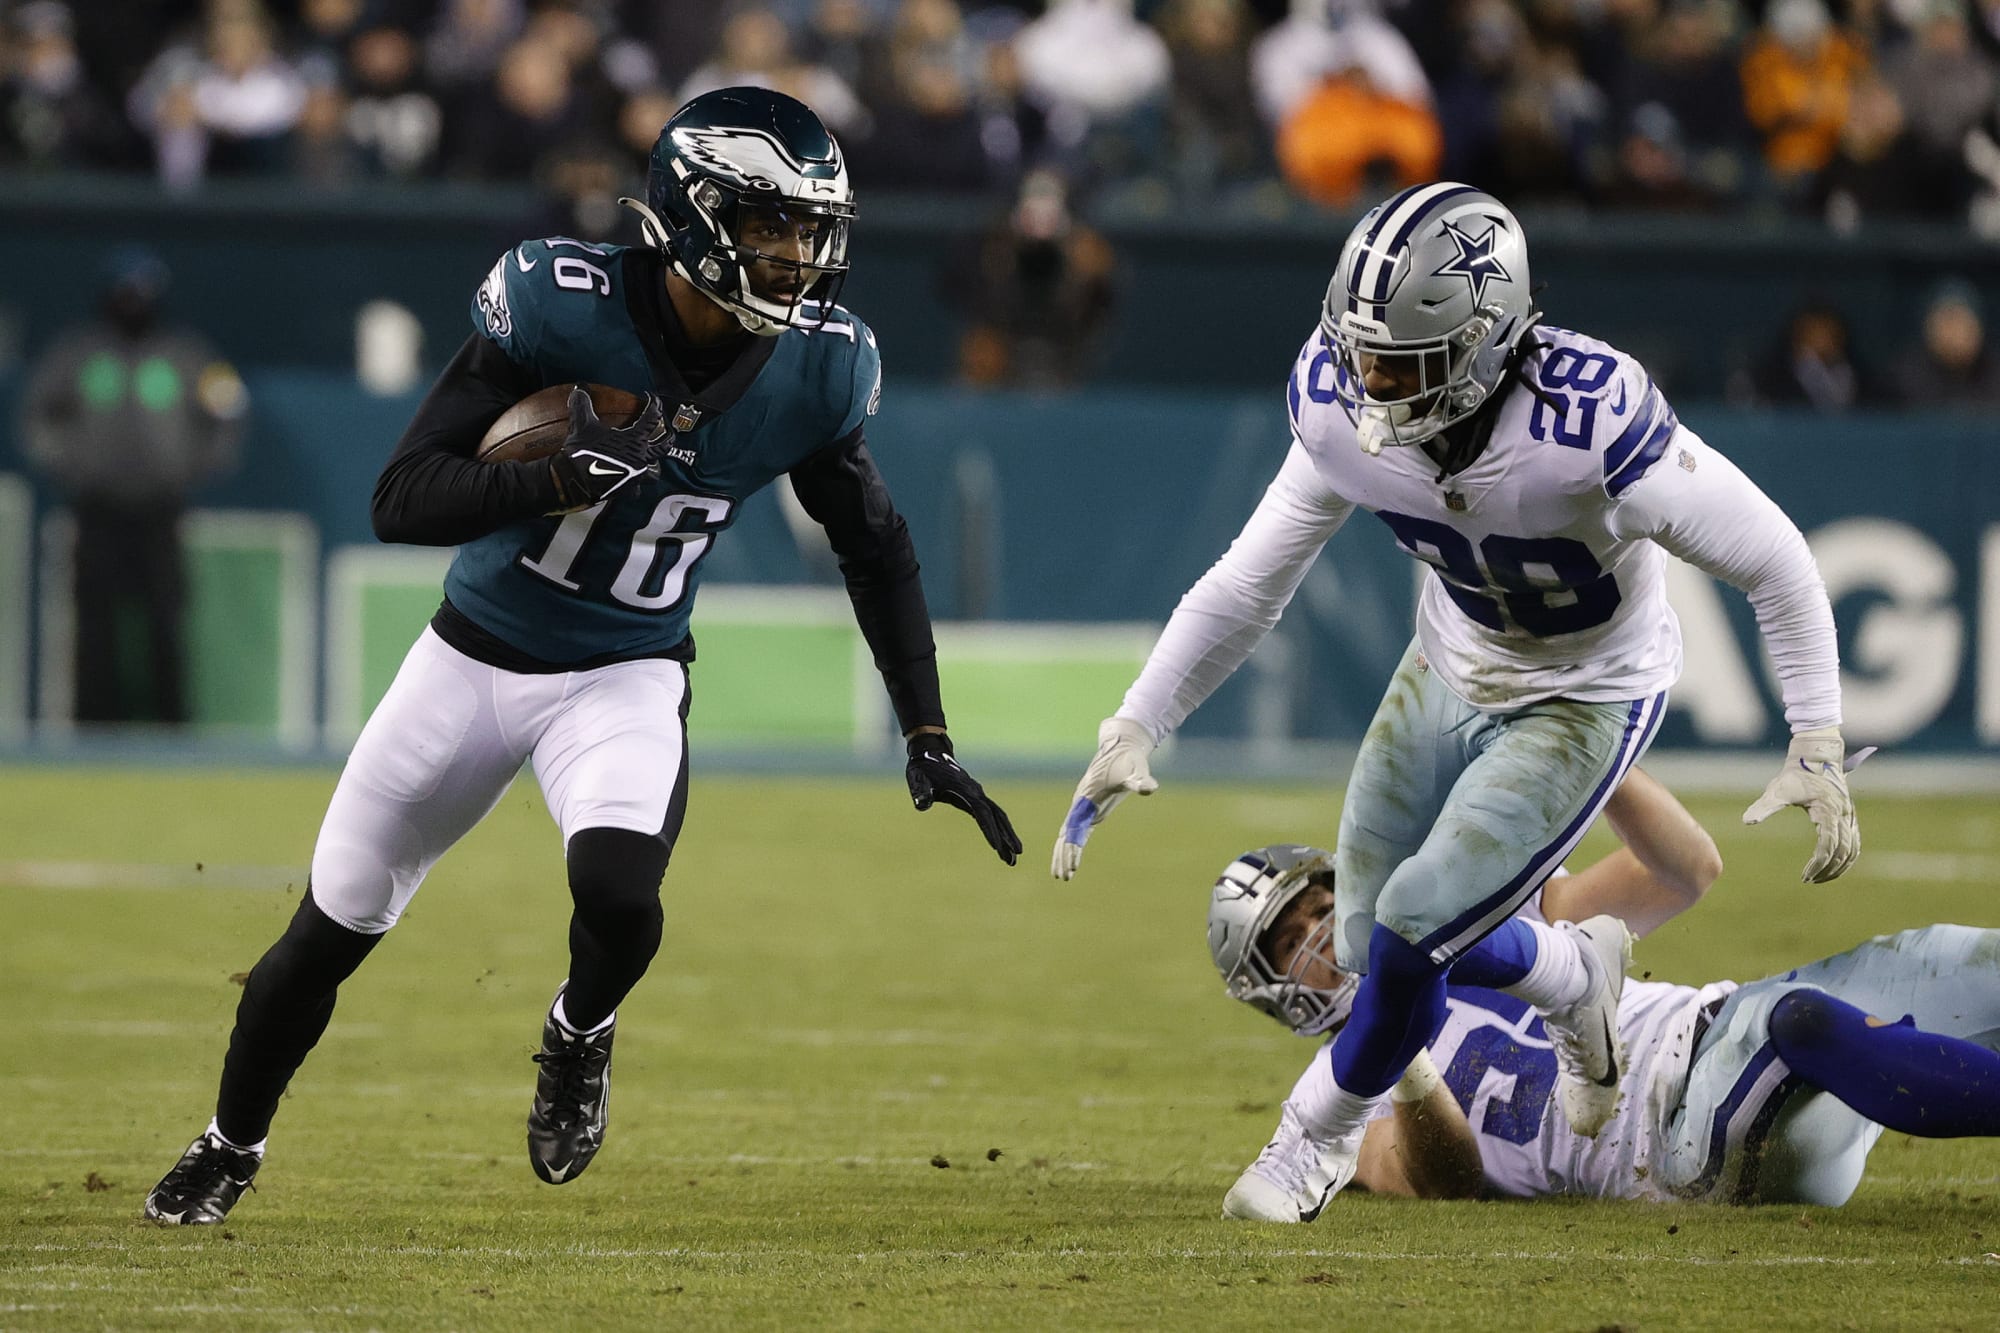 Eagles versus Cowboys: Here's what the national media is saying